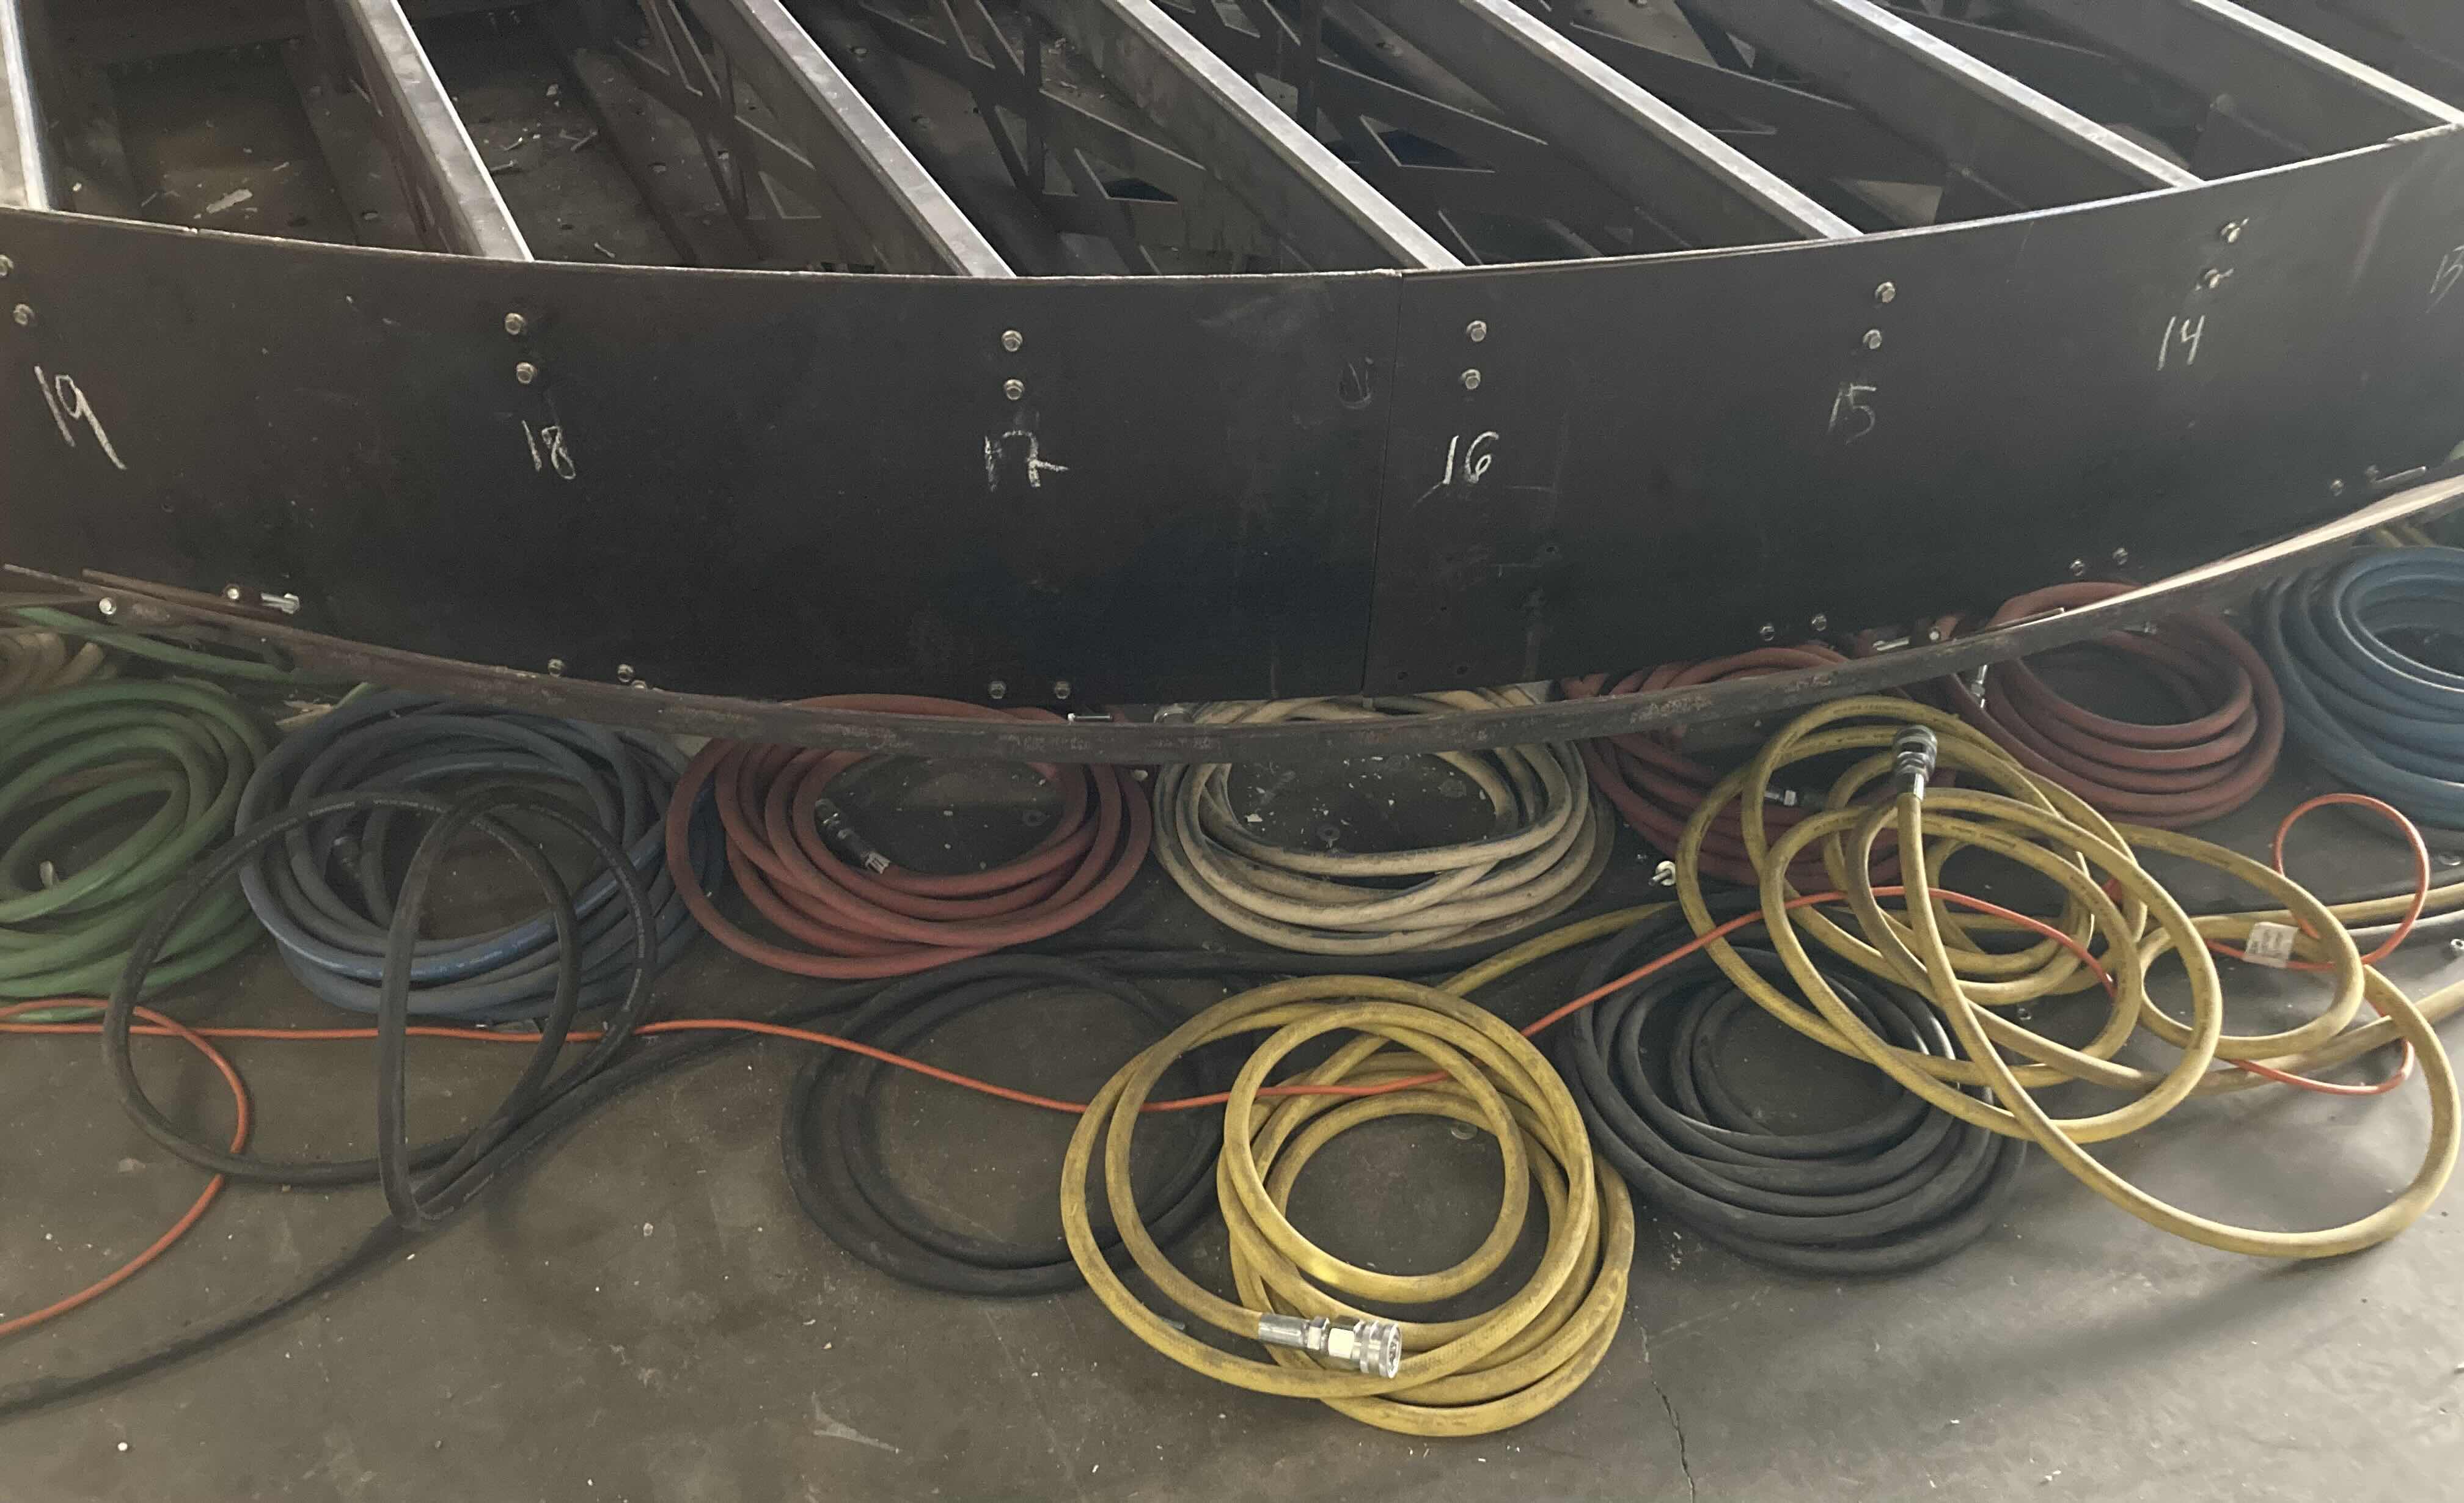 Photo 19 of CUSTOM FABRICATED HEAVY-DUTY STEEL AIR HOSE OPERATED VEHICLE PLATFORM W 19 AIR HOSES FOR BAG LIFT- VARIOUS LENGTHS & PSI CAPACITY 353” X 282” H23” (APPOX 2-3TONS)